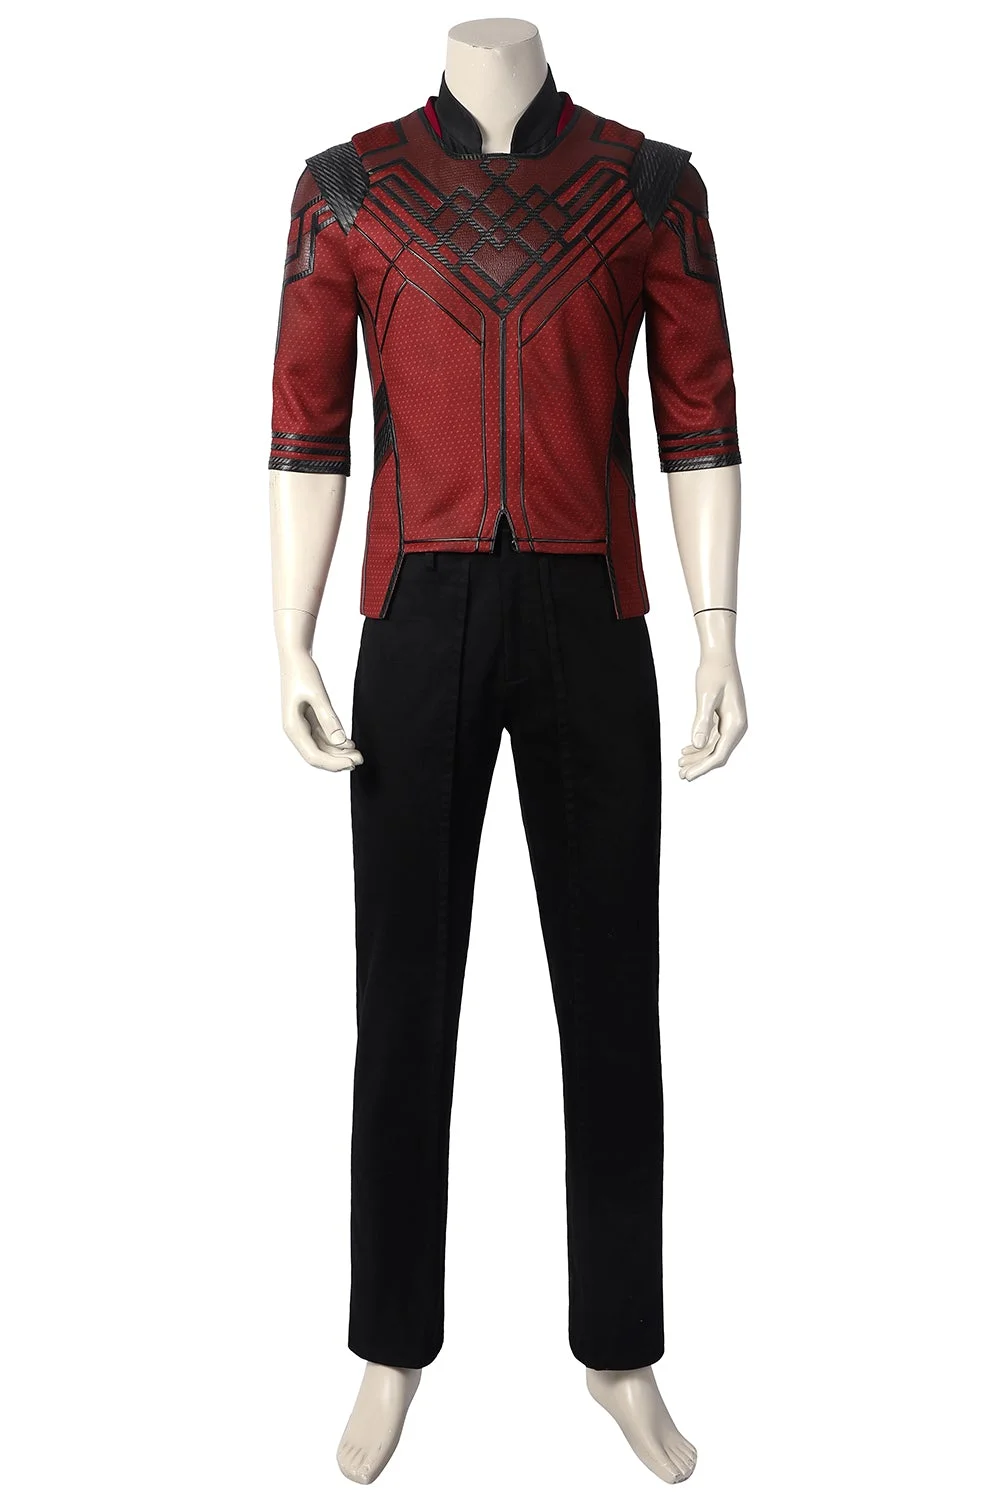 Shang-Chi Cosplay Costumes outfit